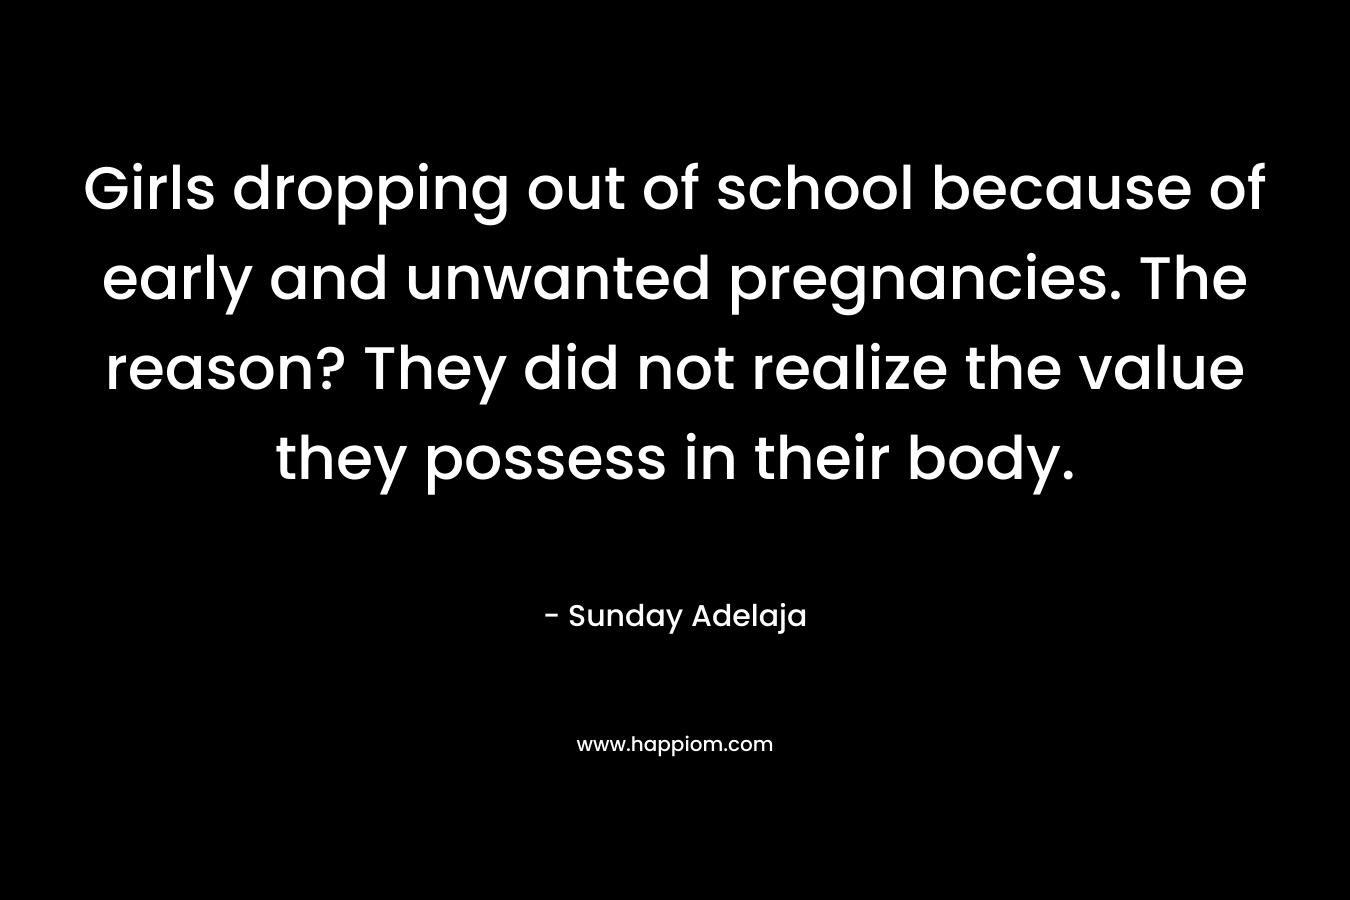 Girls dropping out of school because of early and unwanted pregnancies. The reason? They did not realize the value they possess in their body. – Sunday Adelaja